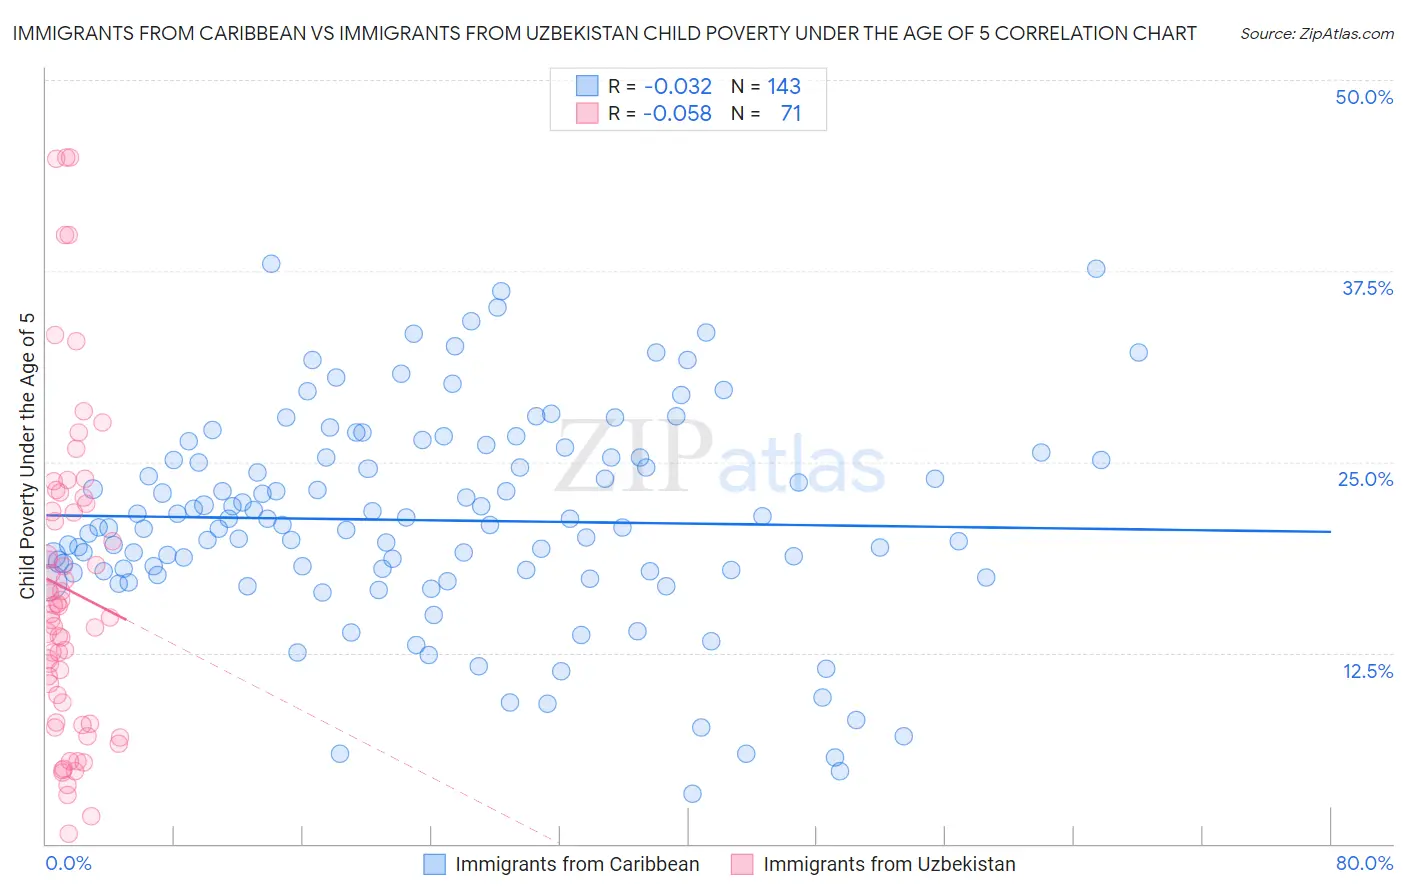 Immigrants from Caribbean vs Immigrants from Uzbekistan Child Poverty Under the Age of 5